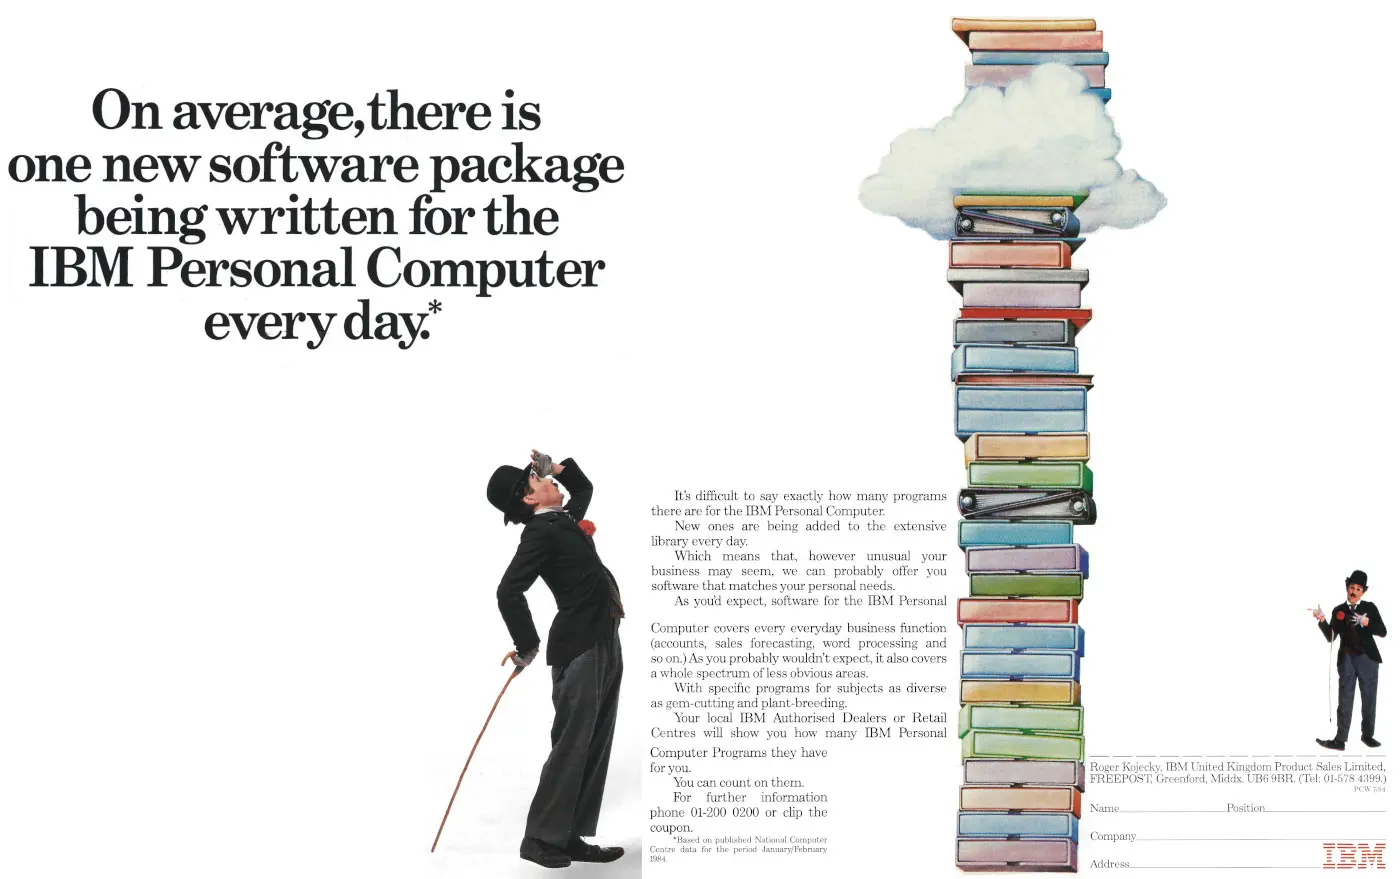 IBM Advert: On average, there is one new software package written for the IBM Personal Computer every day, from Personal Computer World, December 1984